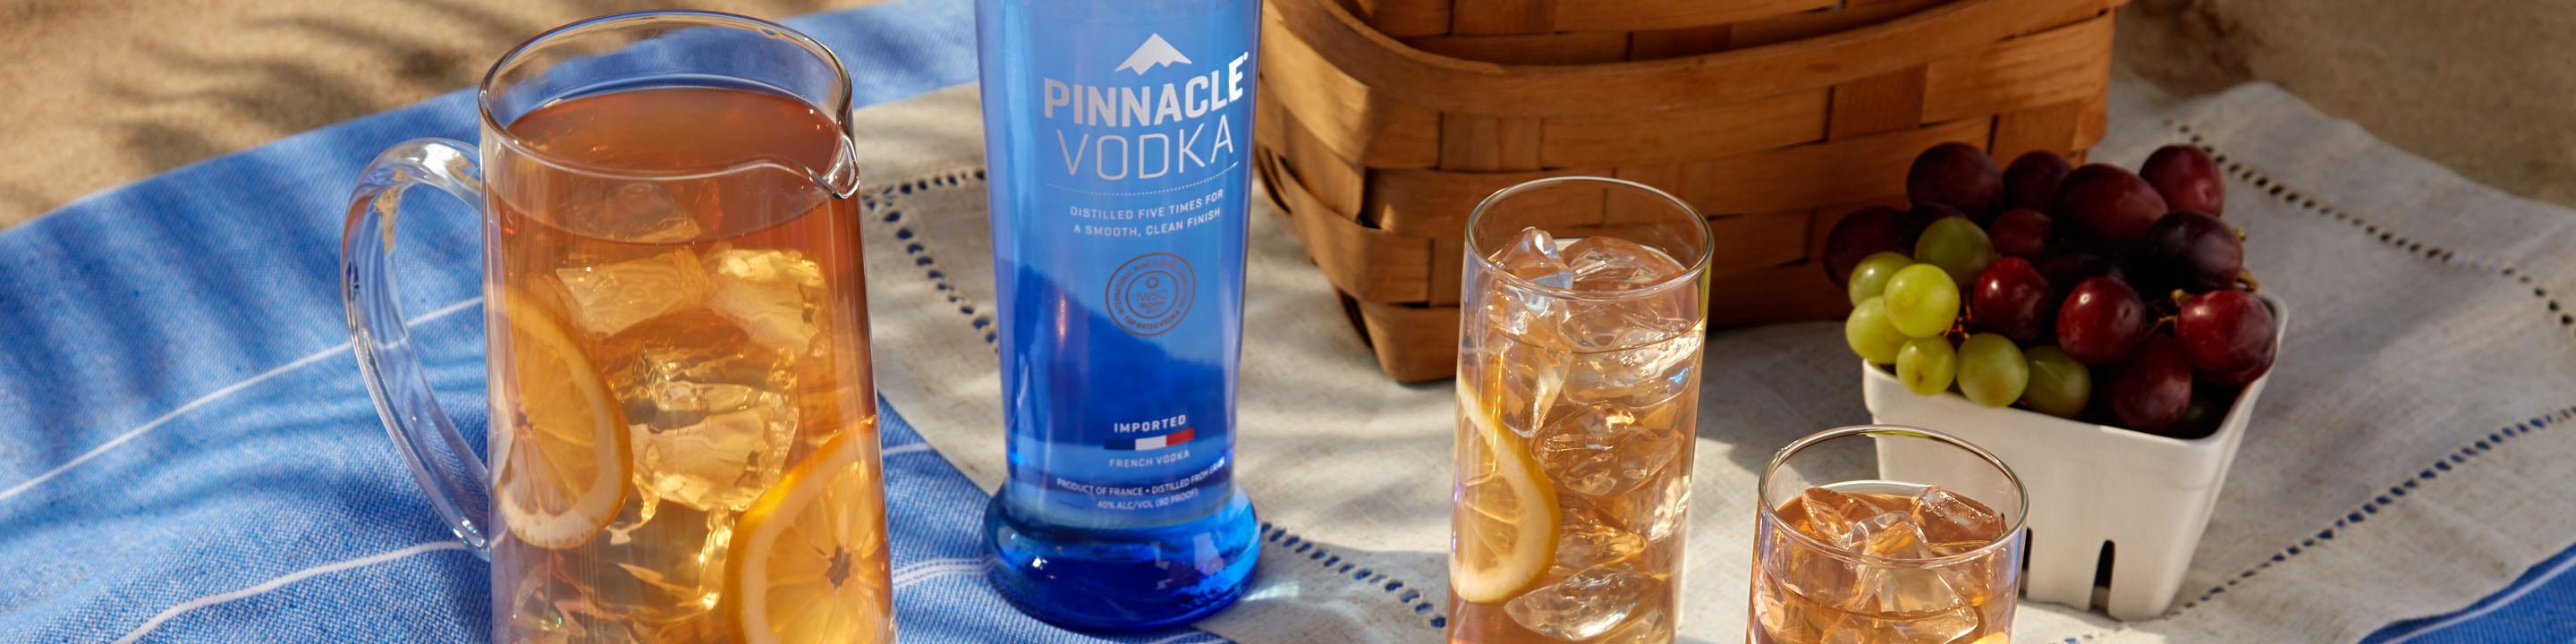 Distilled five times for smoothness, this vodka leaves no doubt as to why it's considered a classic. Enjoy in a shot, a simple mixed drink or a finely crafted cocktail.

Buy Pinnacle online now from nearby liquor stores via Minibar Delivery.